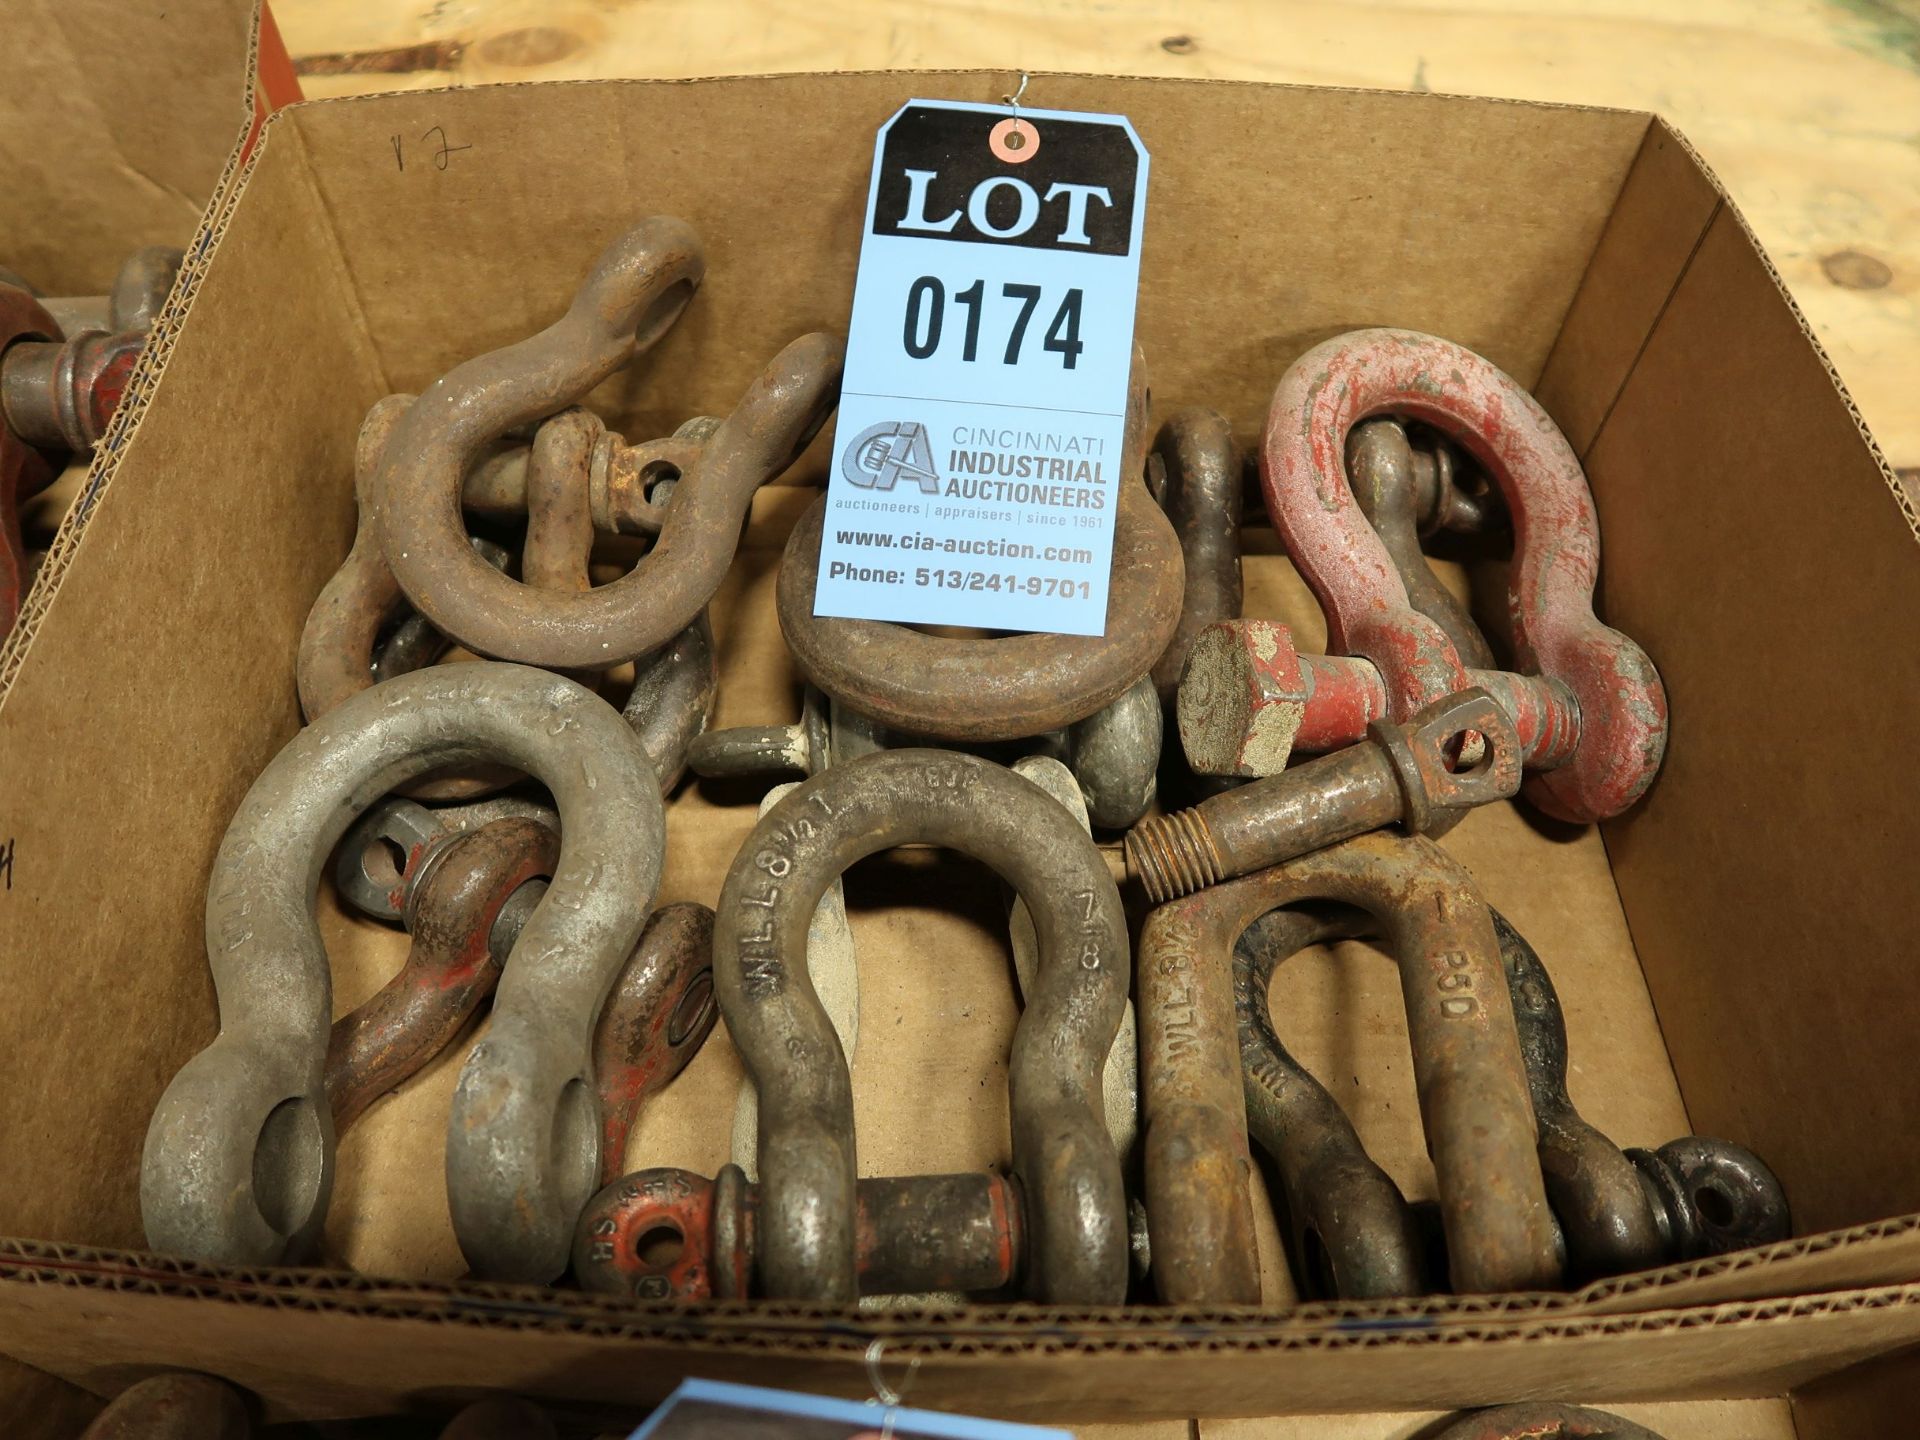 MISCELLANEOUS SHACKLES